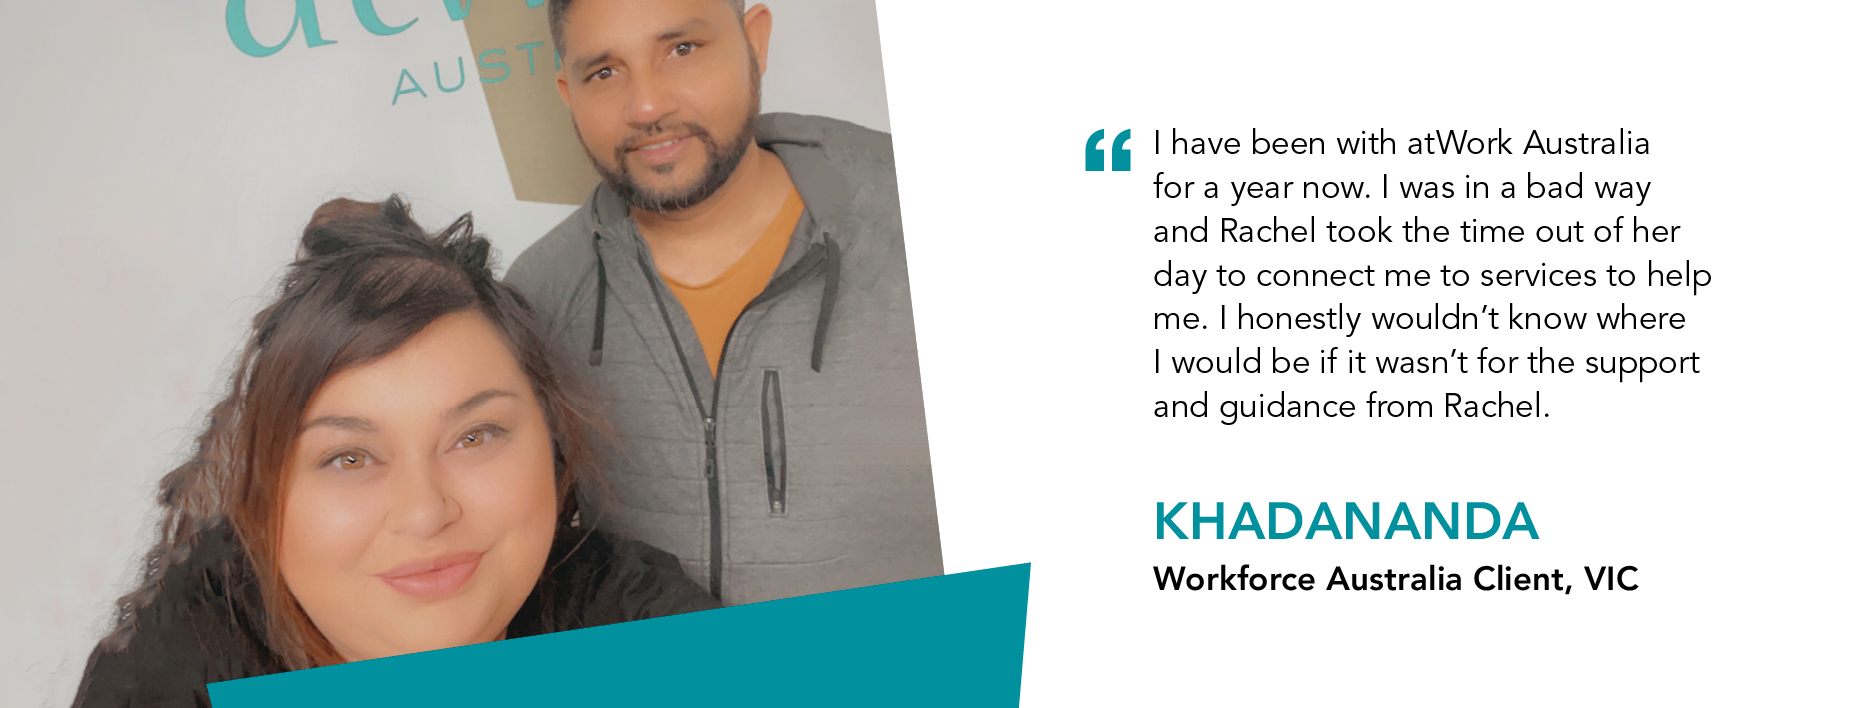 Quote reads "I have been with atWork Australia for a year now. I was in a bad way and Rachel took the time out of her day to connect me to services to help me. I honestly wouldn't know where I would be if it wasn't for the support and guidance from Rachel. Said Khadananda. Client from Victoria